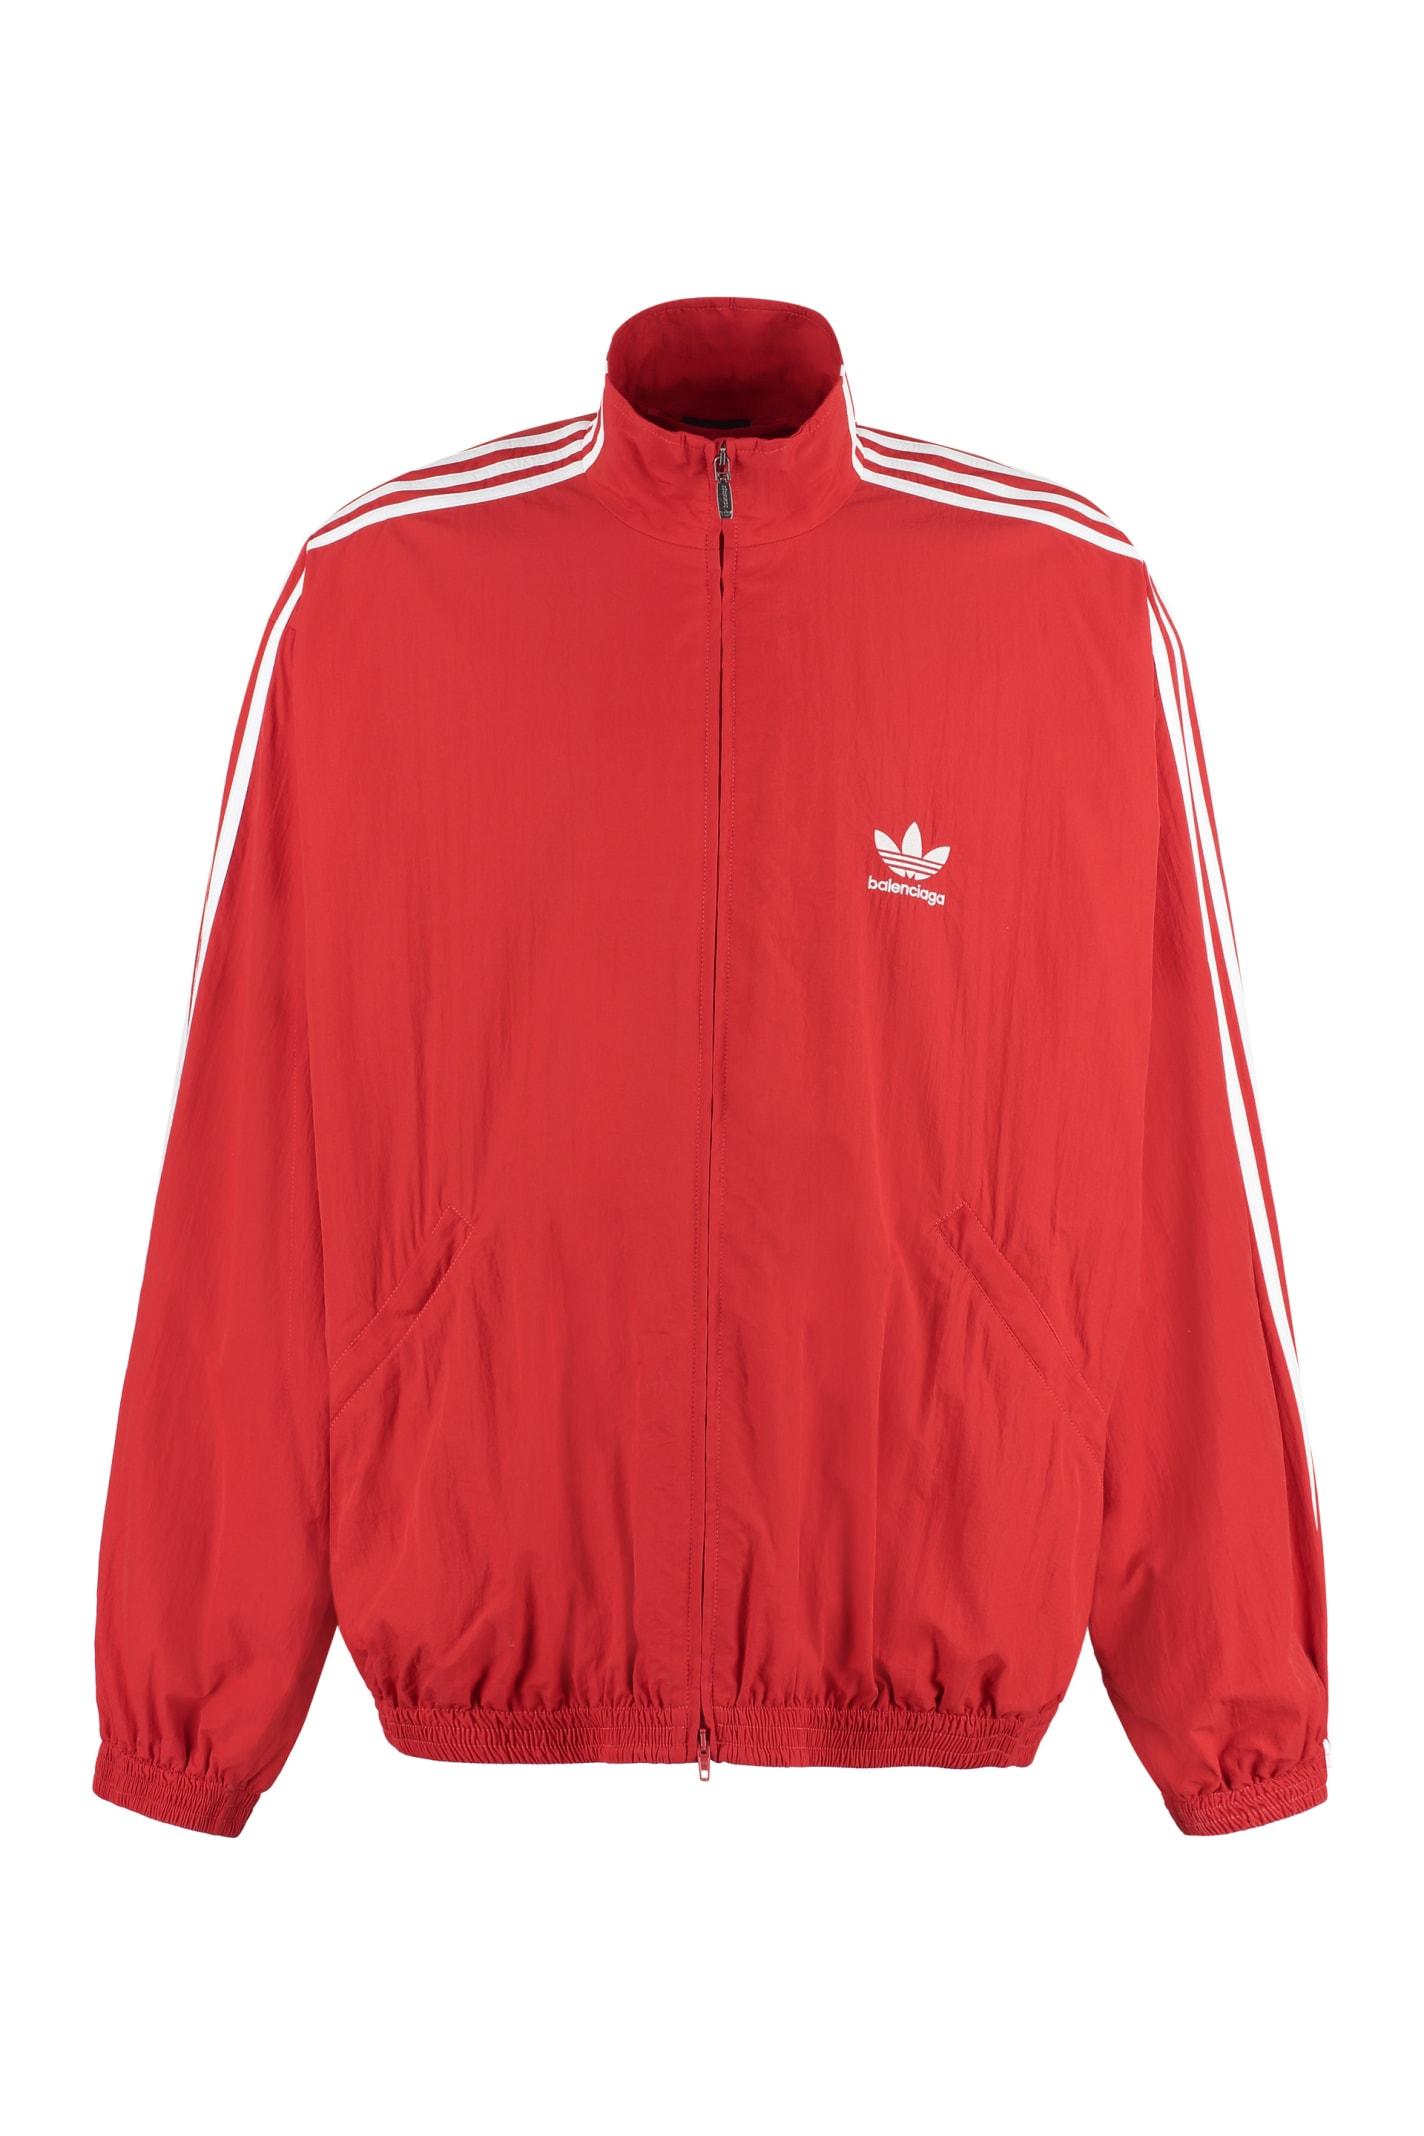 Balenciaga X Adidas - Tracksuit Nylon Jacket in Red for Men | Lyst